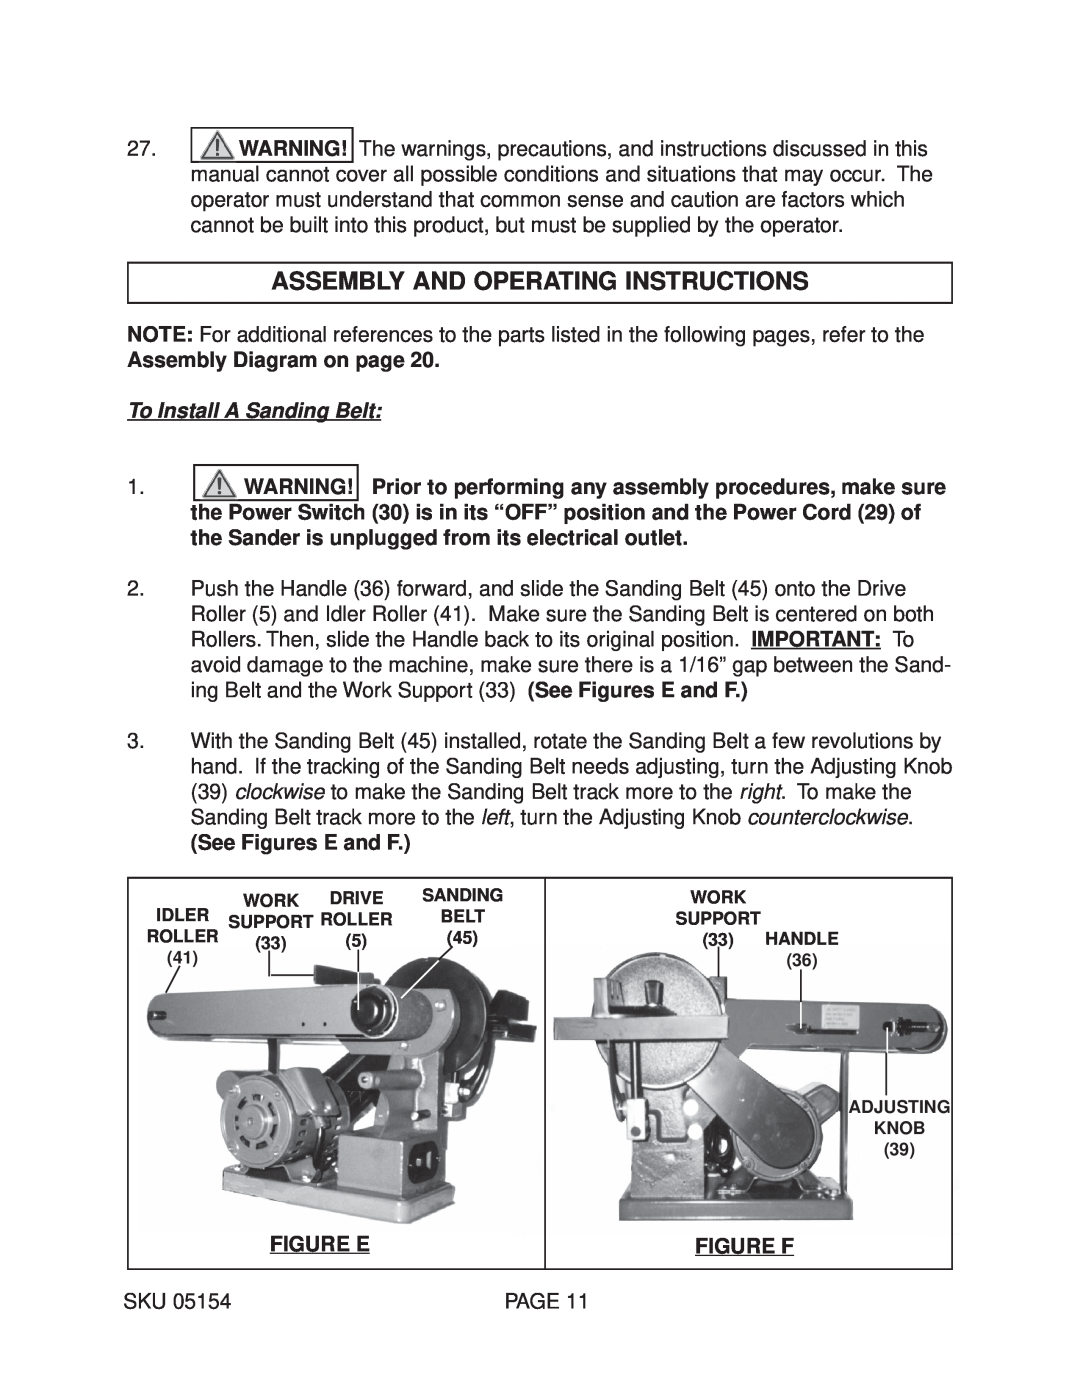 Harbor Freight Tools 05154 Assembly And Operating Instructions, Assembly Diagram on page, To Install A Sanding Belt 